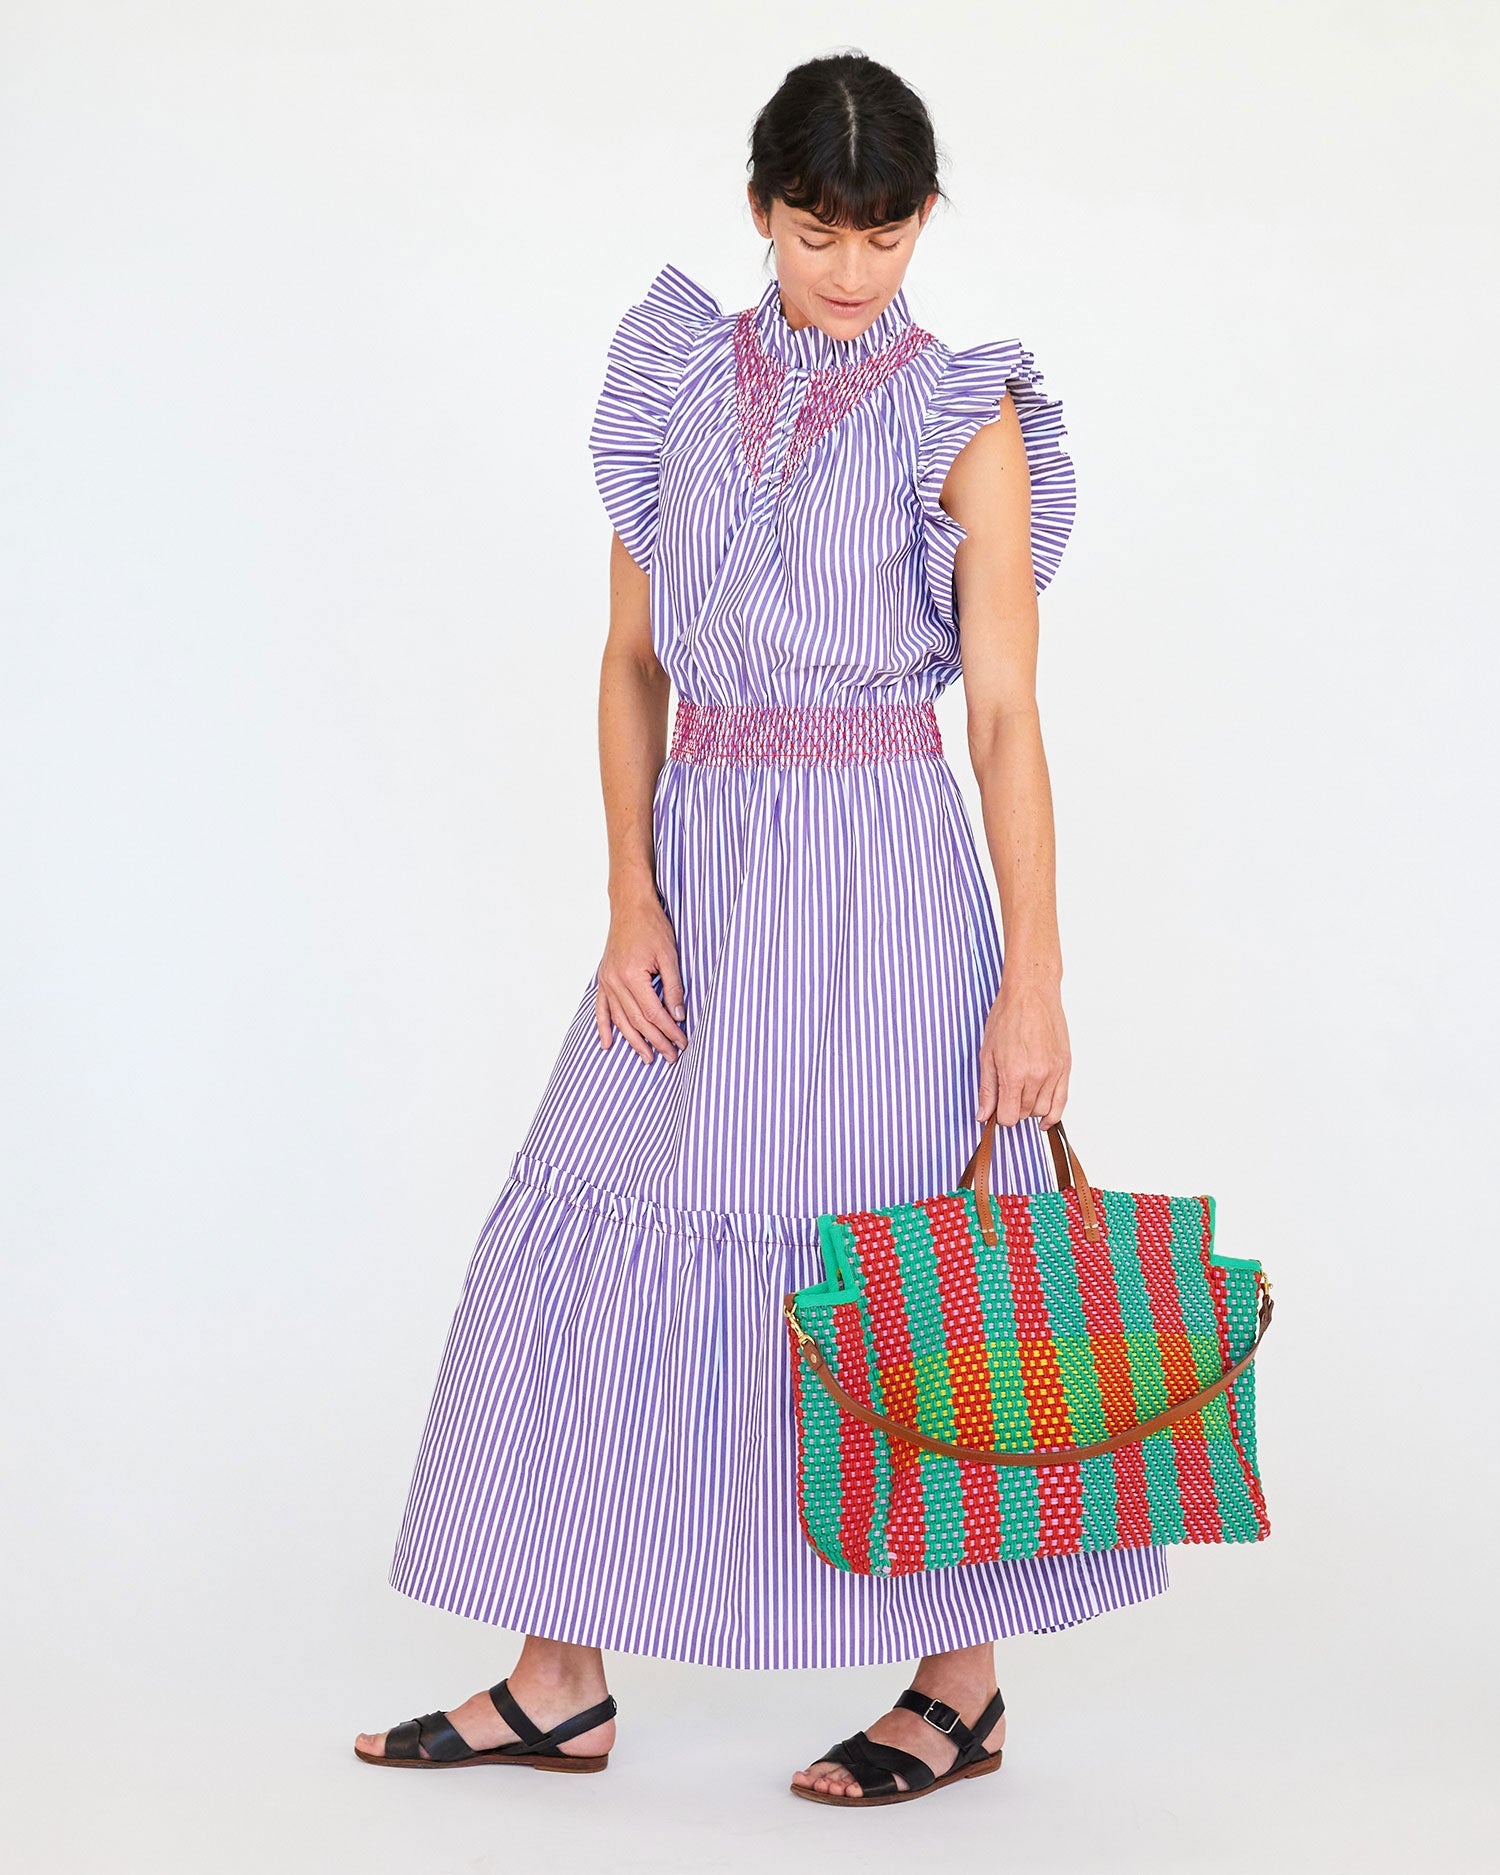 Buy Clare V. Summer Simple Tote Bag In Condesa Plaid - Multi At 34